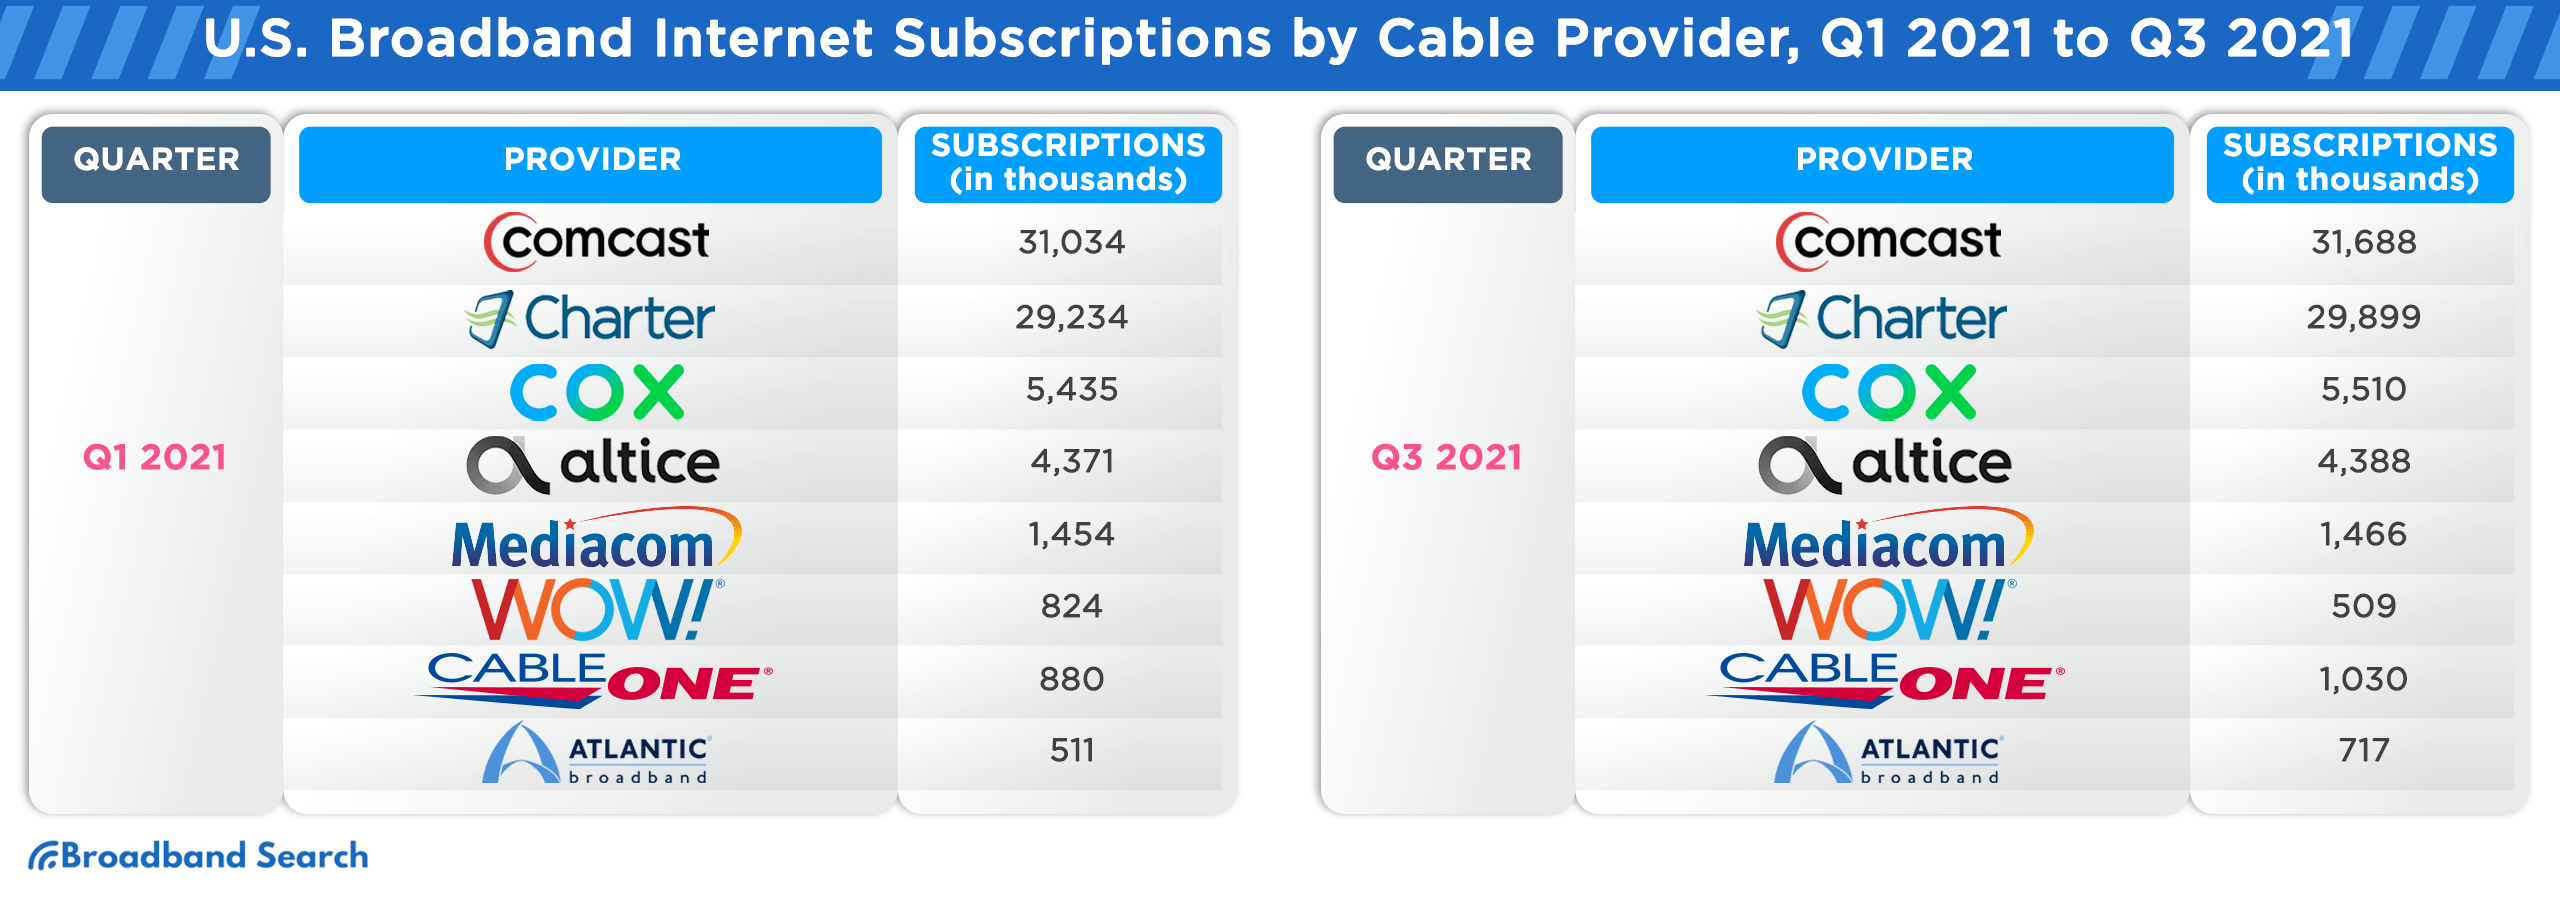 U.S. Broadband Internet Subscriptions by cable provider for quarter one to three of 2021